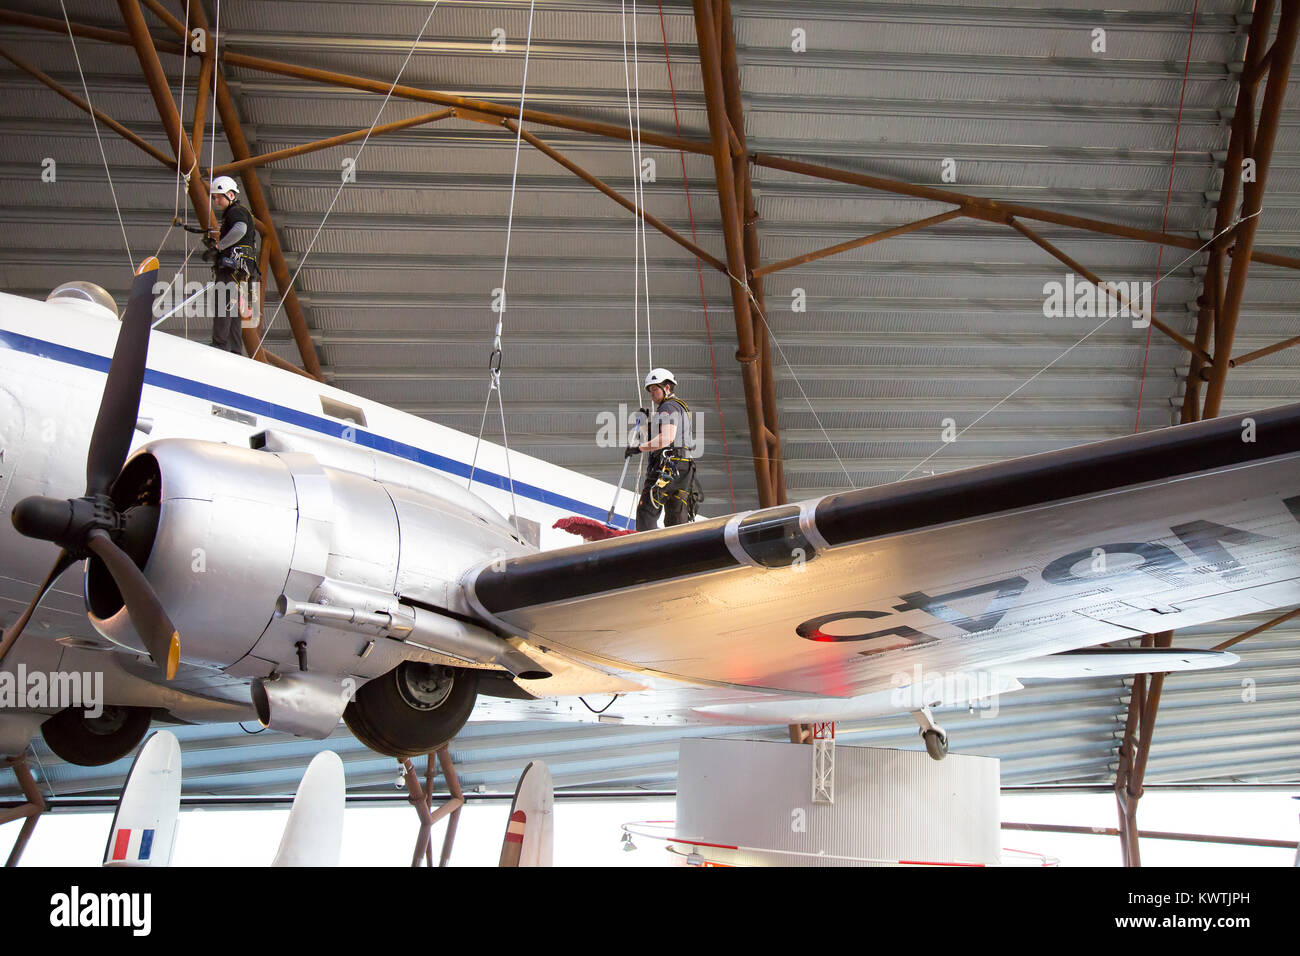 Aircraft cleaning at Royal Air Force Museum Cosford, Shropshire, UK before centenary celebrations begin to mark 100 years of the RAF (January 2018). Stock Photo